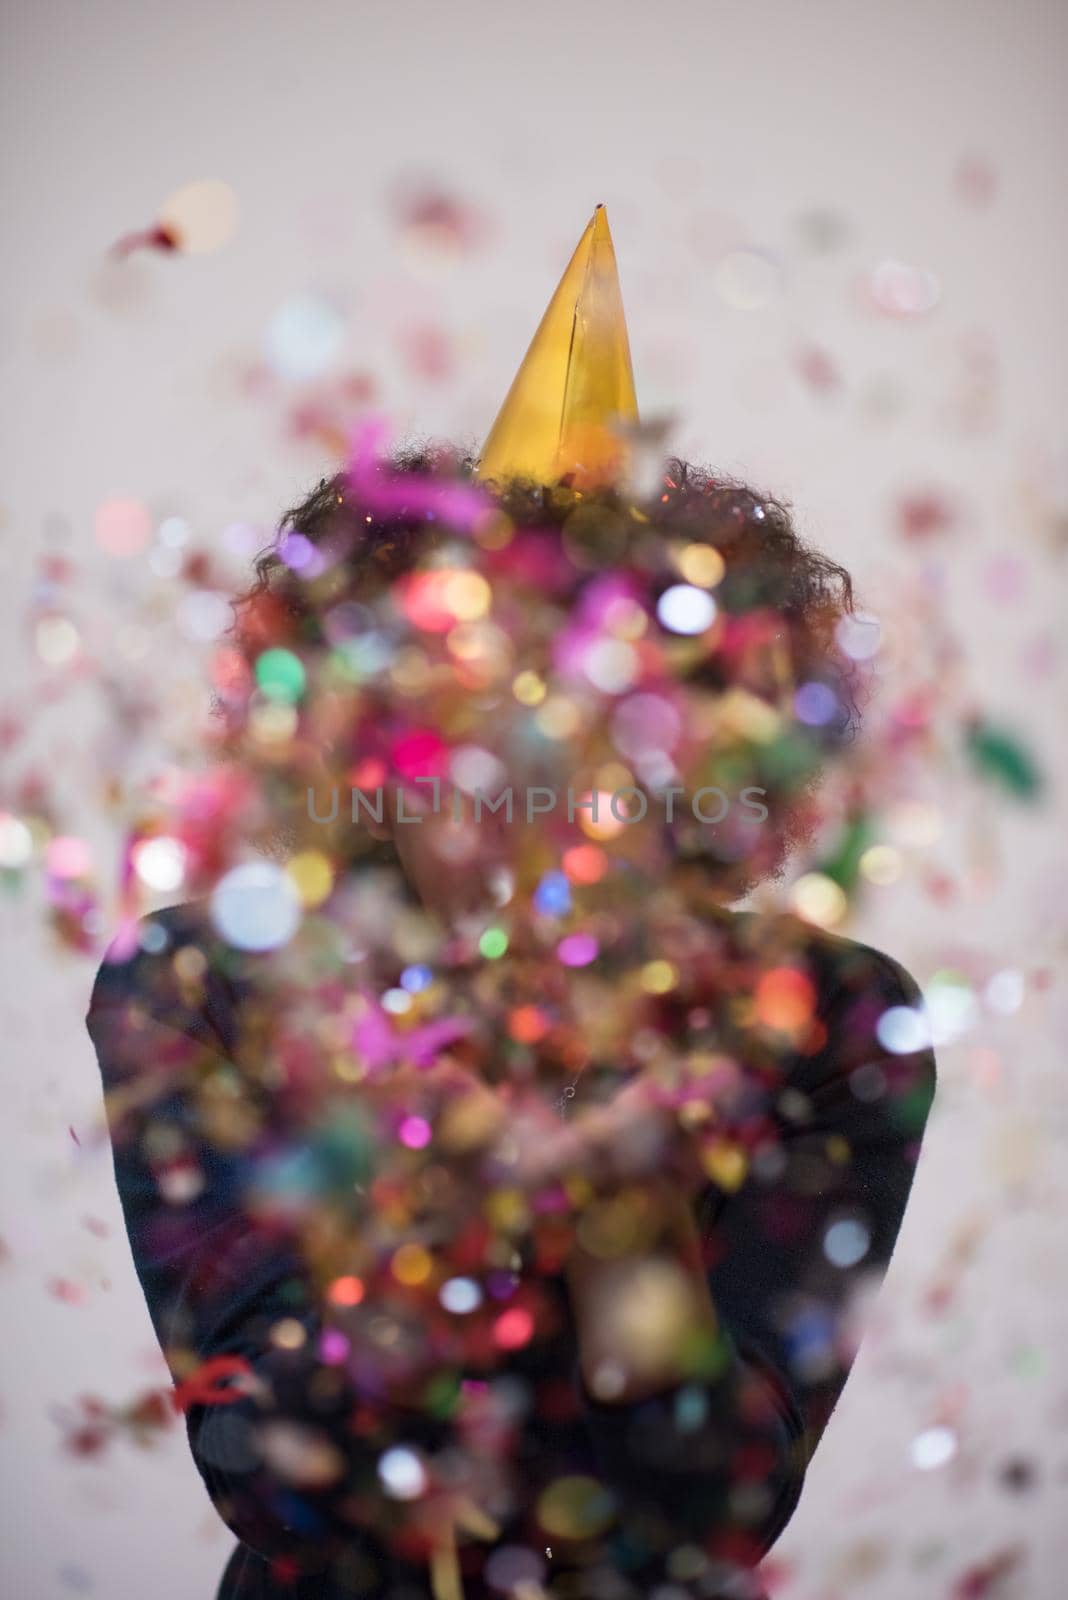 young man on party celebrating new year with falling confetti